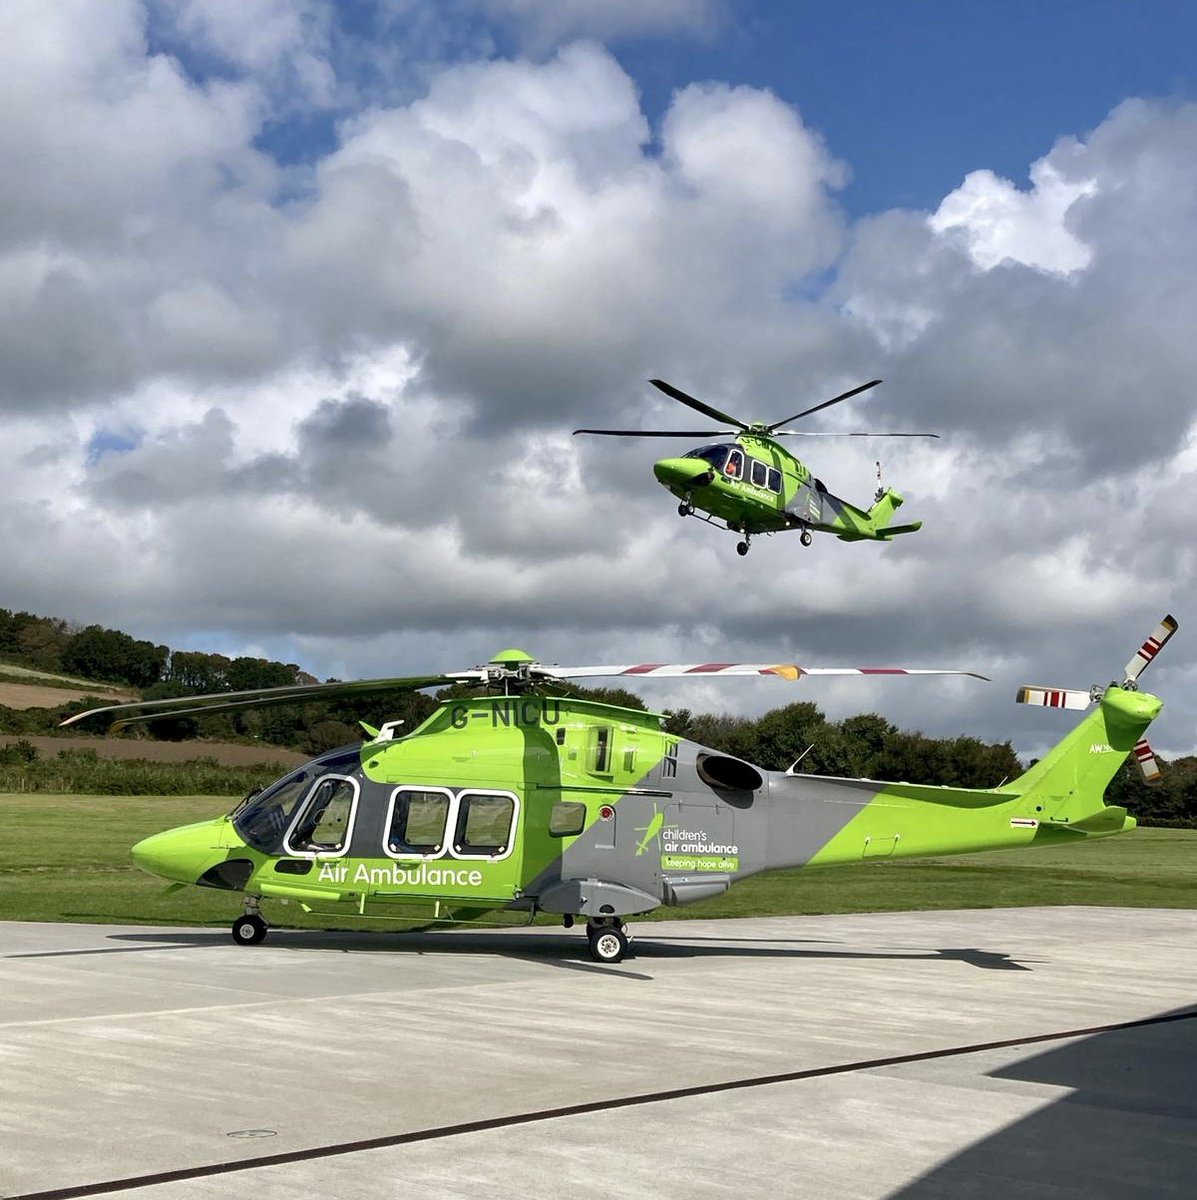 #ThrowbackThursday to this iconic image of our G-NICU & G-CPTZ aircraft 🚁 Help keep us flying, donate today - airamb.co/3v4cAGJ #childrensairambulance #keepinghopealive #charity #donate